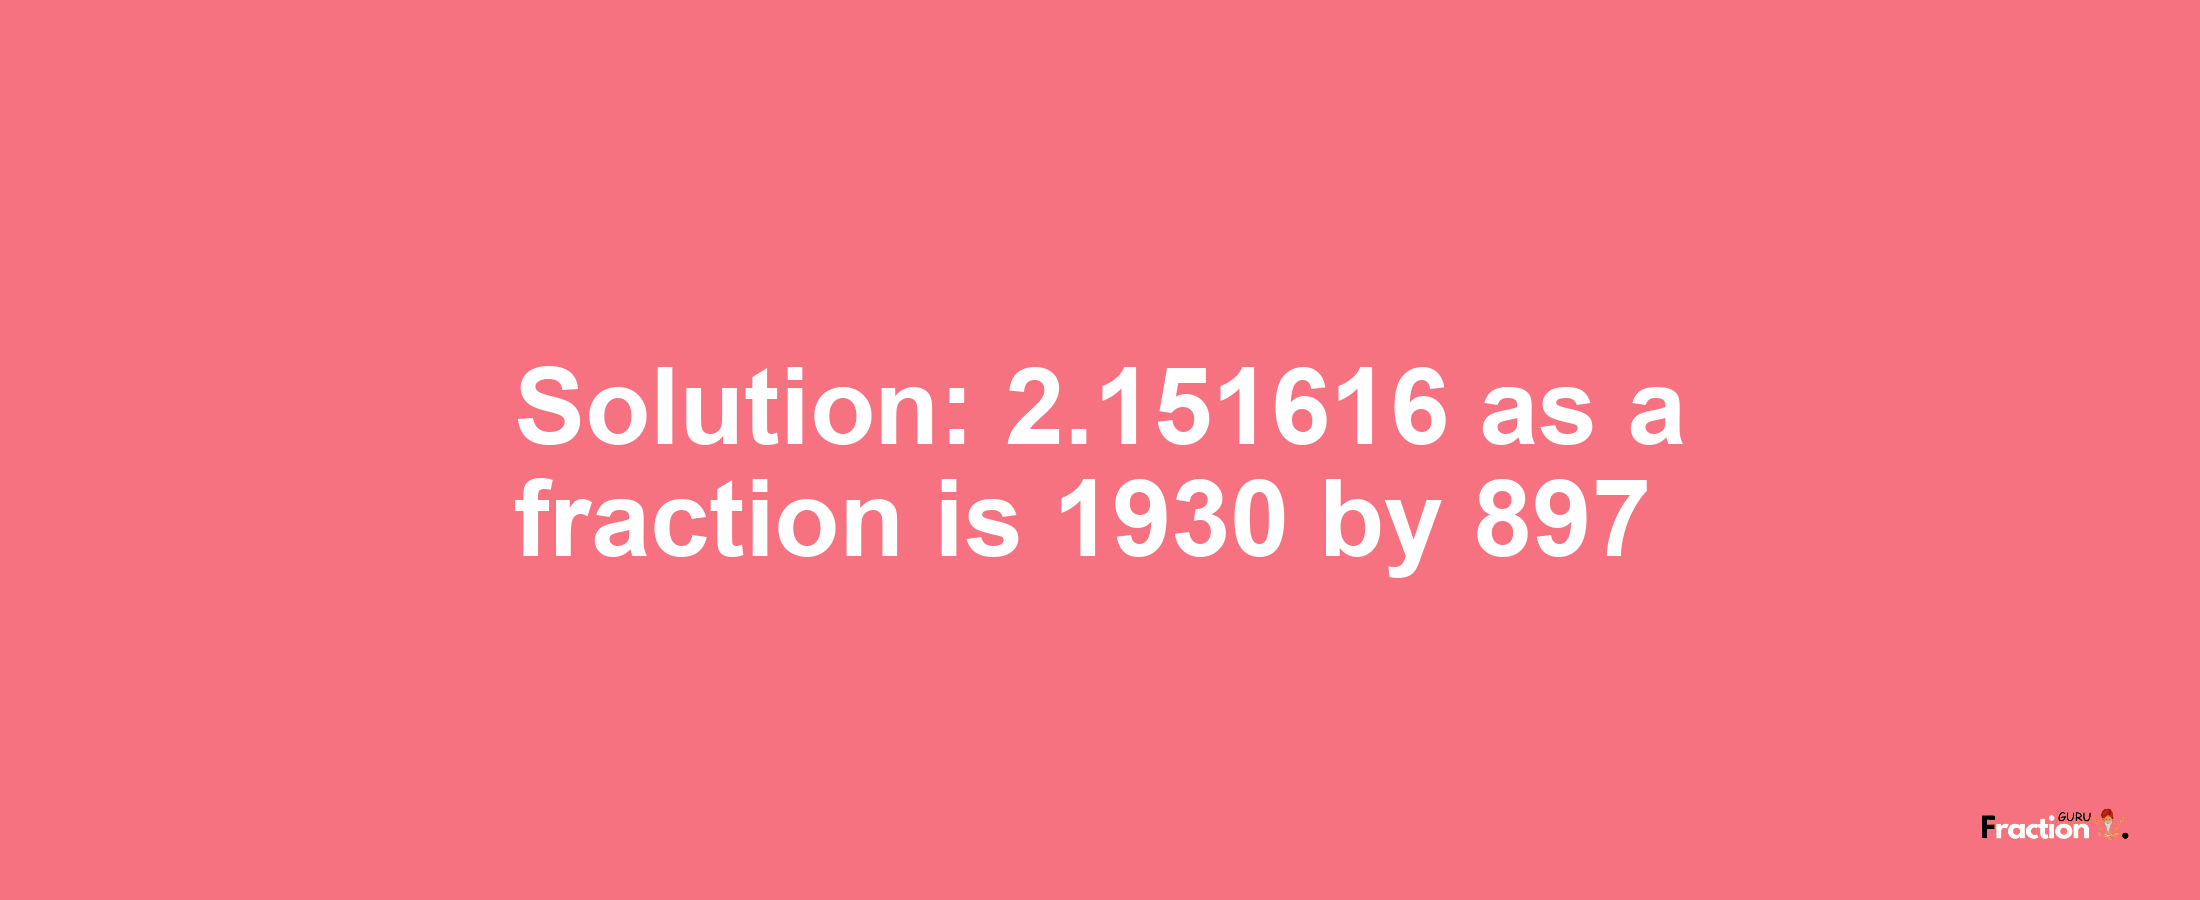 Solution:2.151616 as a fraction is 1930/897